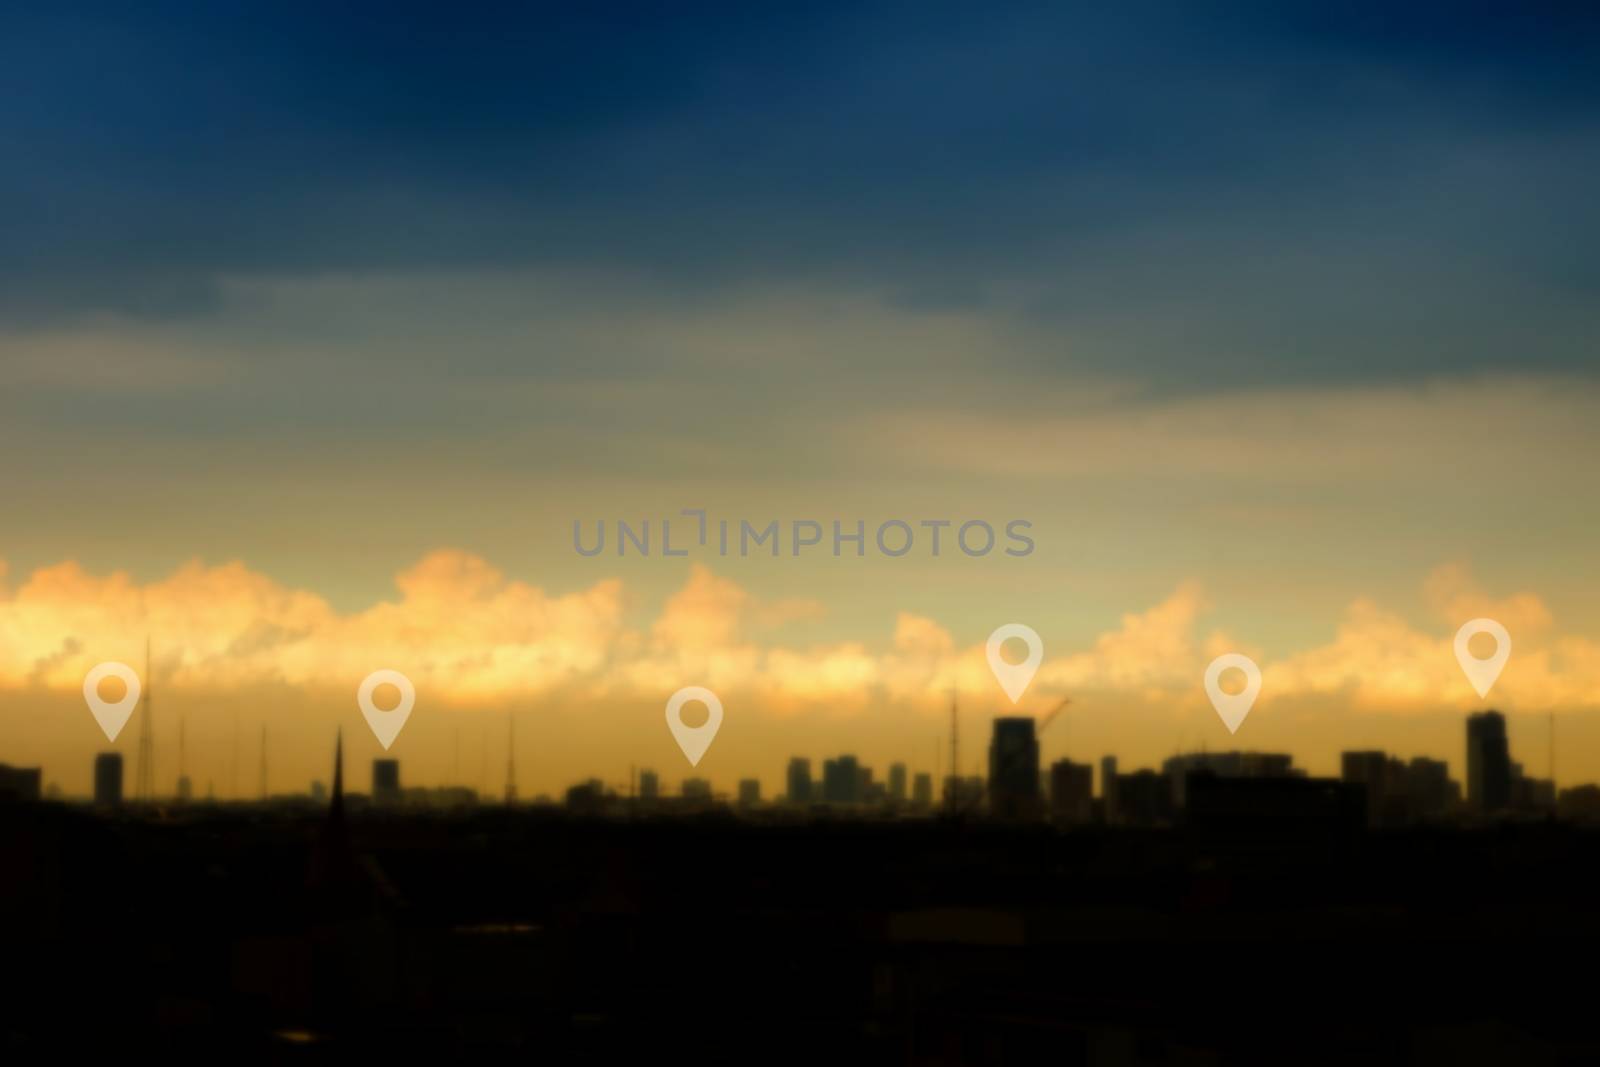 Location Pins Icon on Blurred Building with Sunset Background.